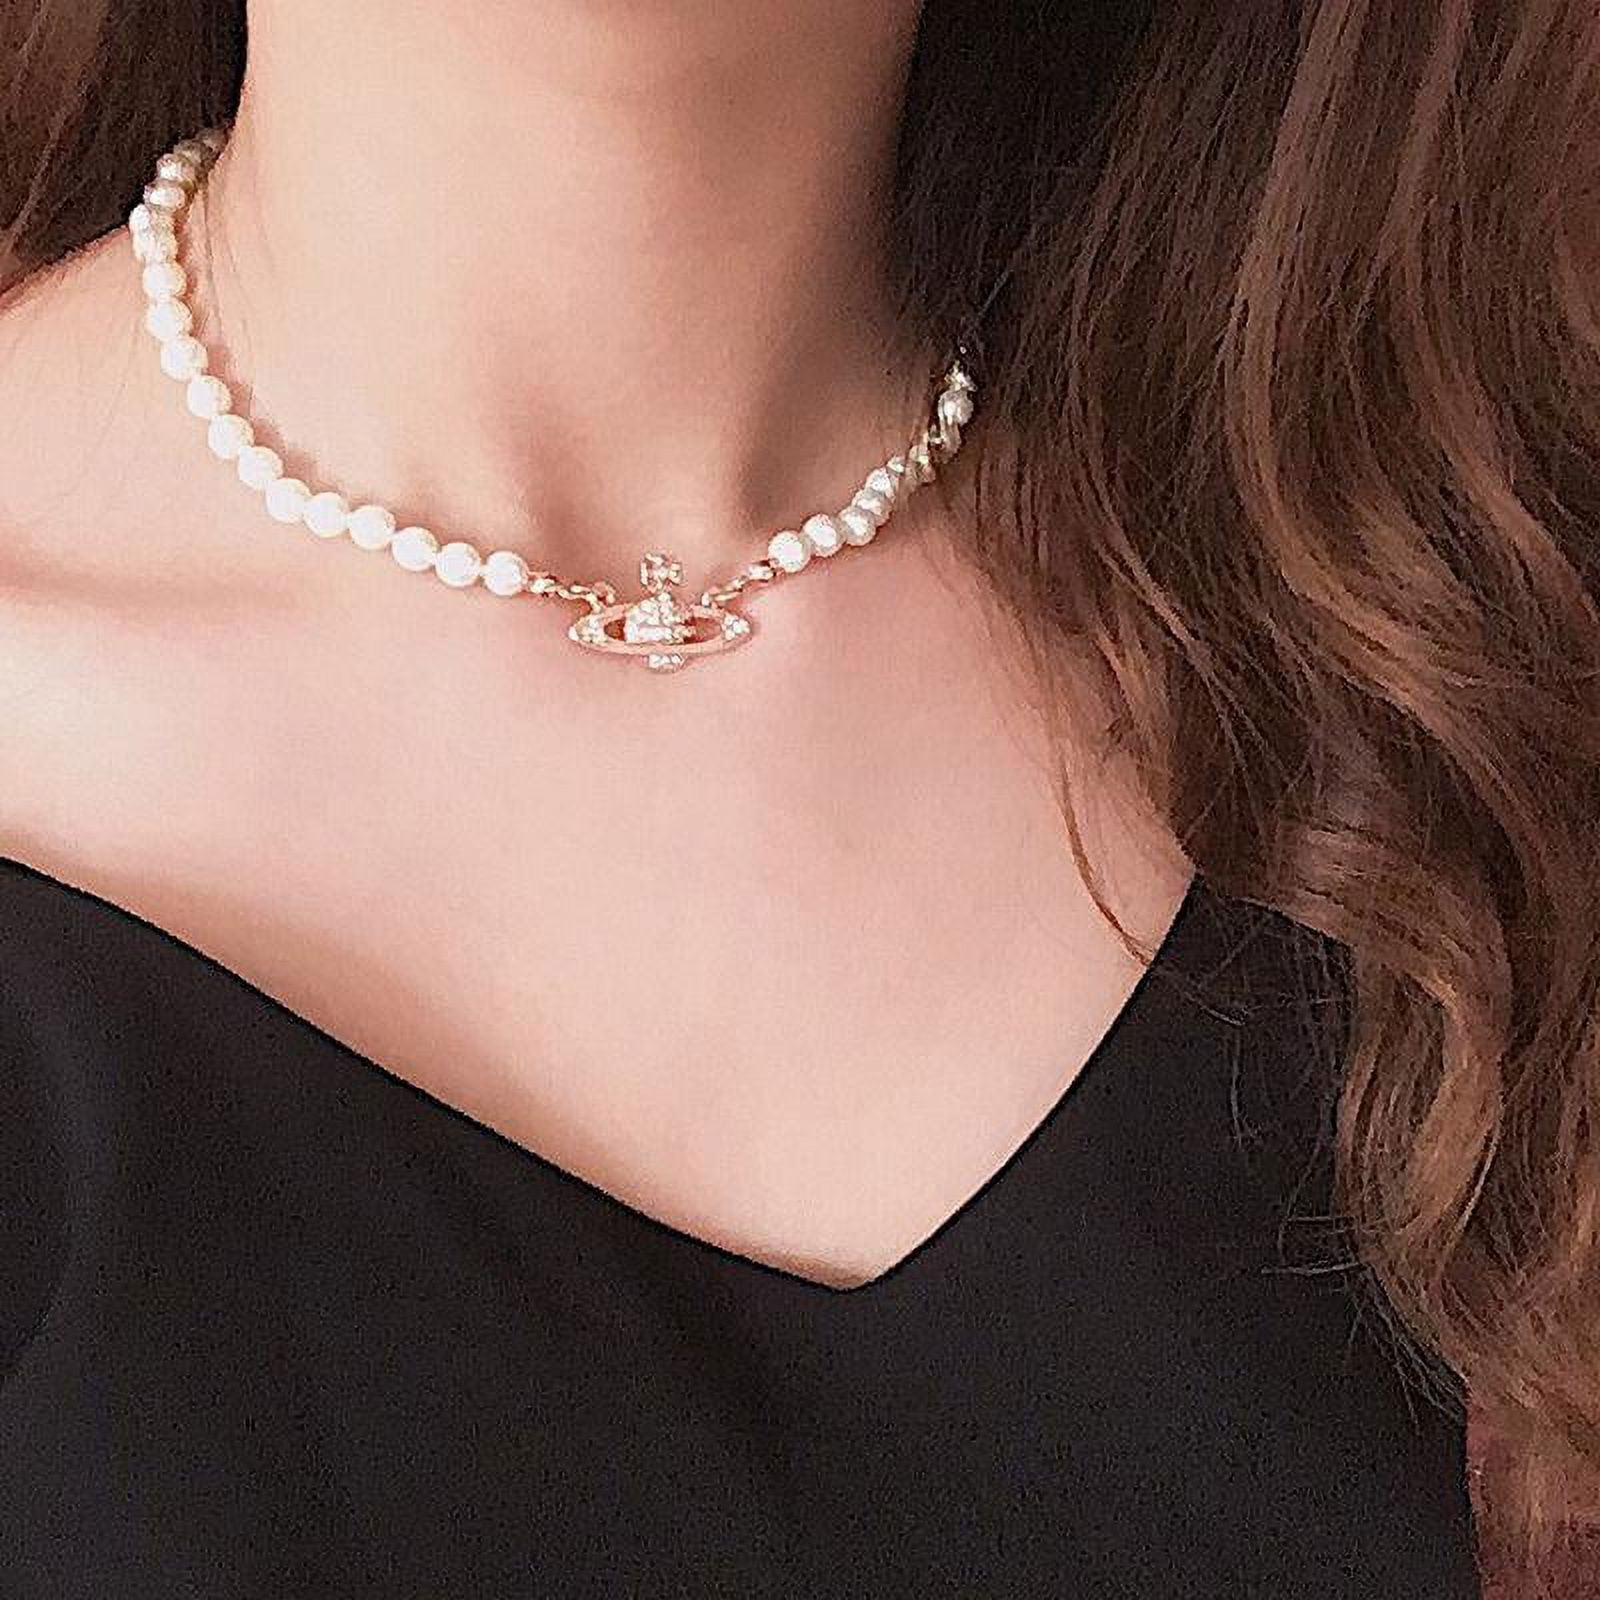 Gold Vivian Pearl Designer Beads Necklace With Pendant Luxury Womens Saturn  Choker Jewelry By Westwood 32423 From Valan, $27.14 | DHgate.Com